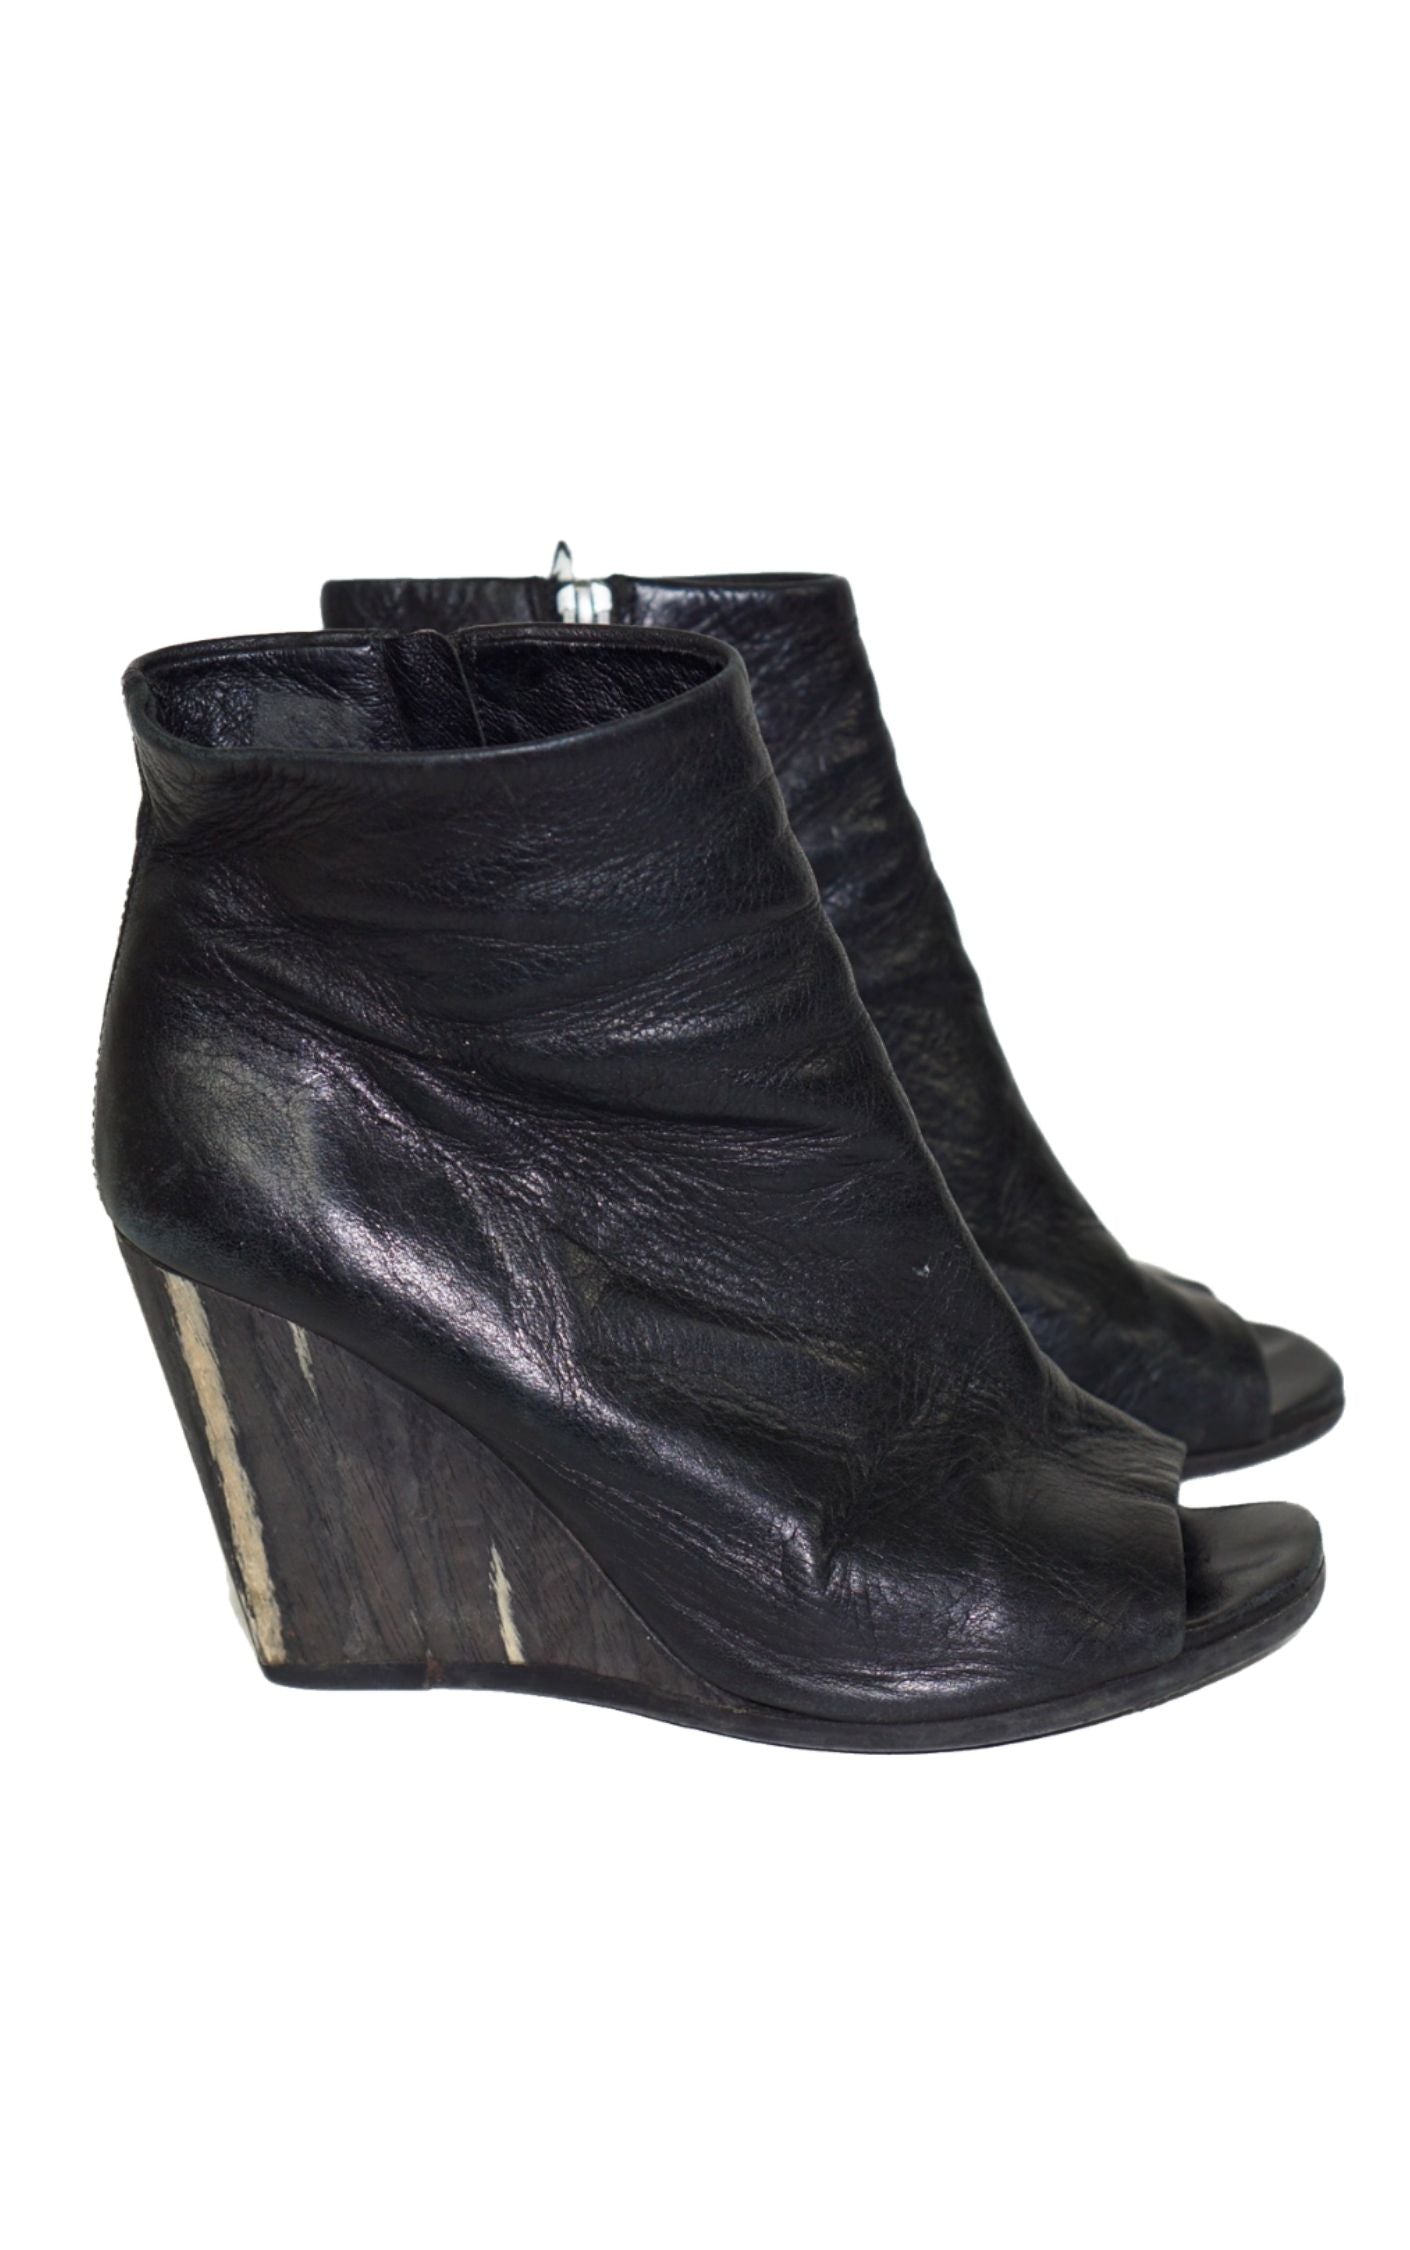 ALL SAINTS Open Toe Leather Wedge Boots